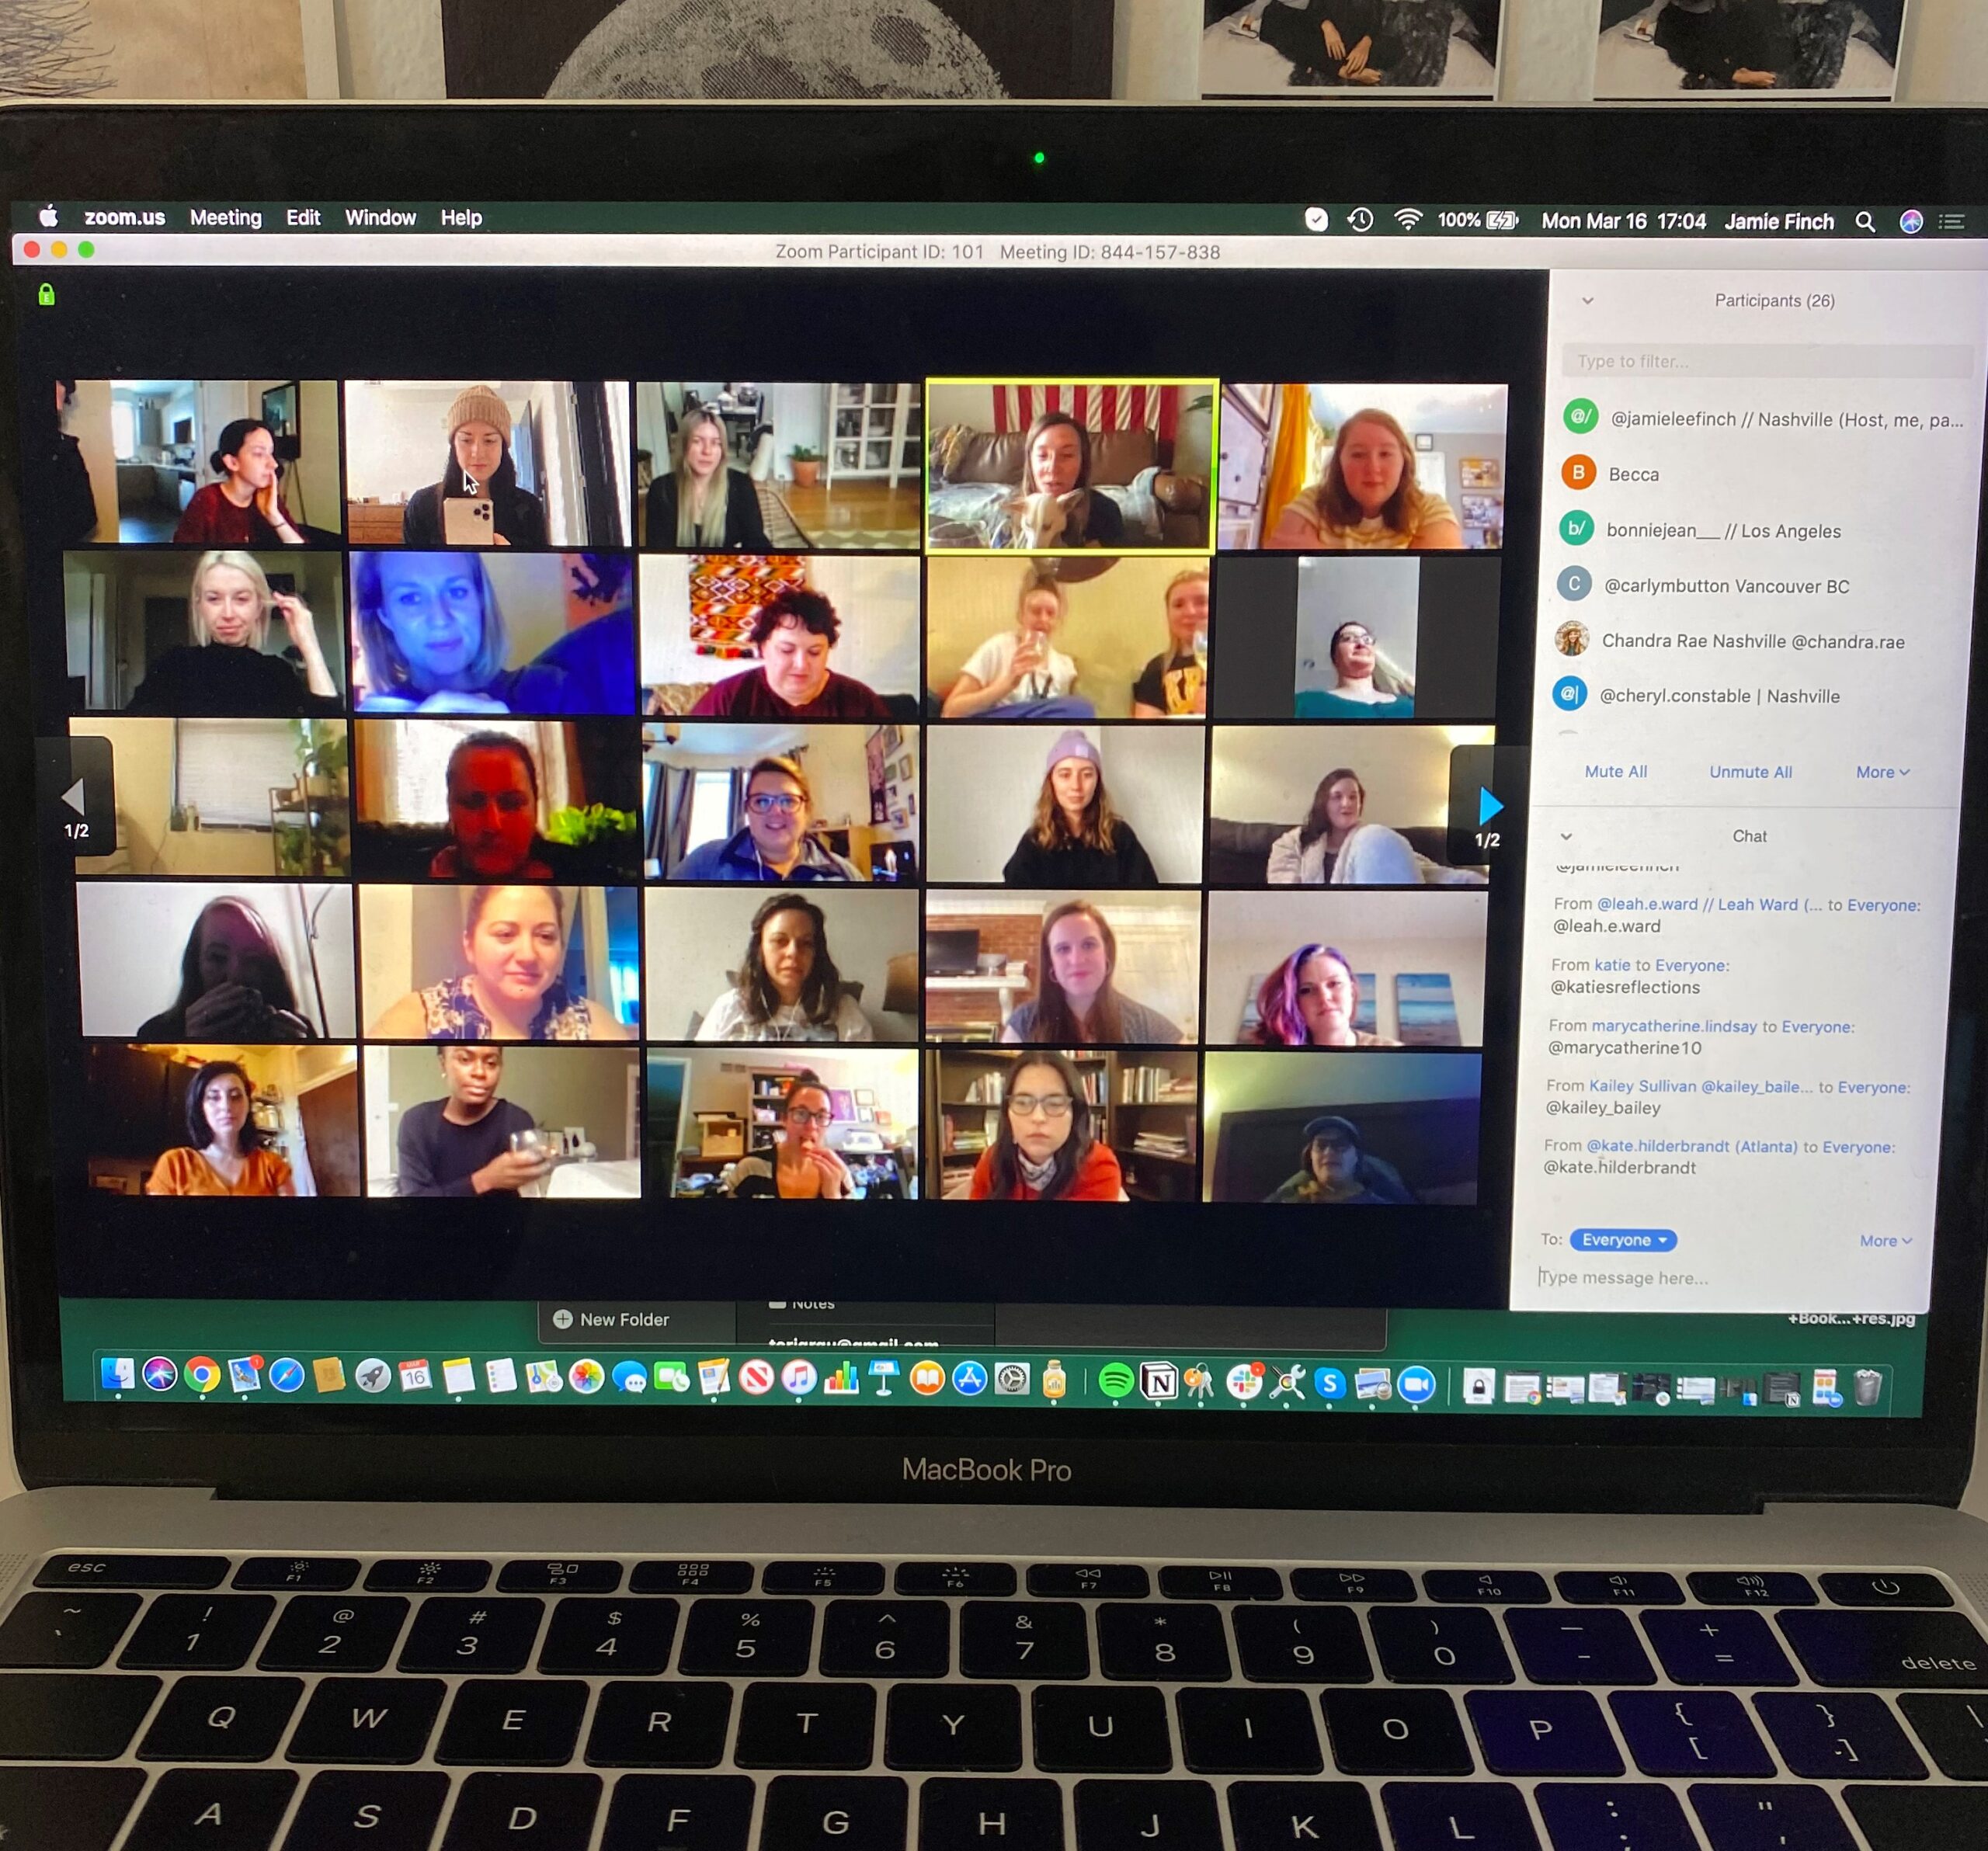 People gathered together online for a virtual happy hour